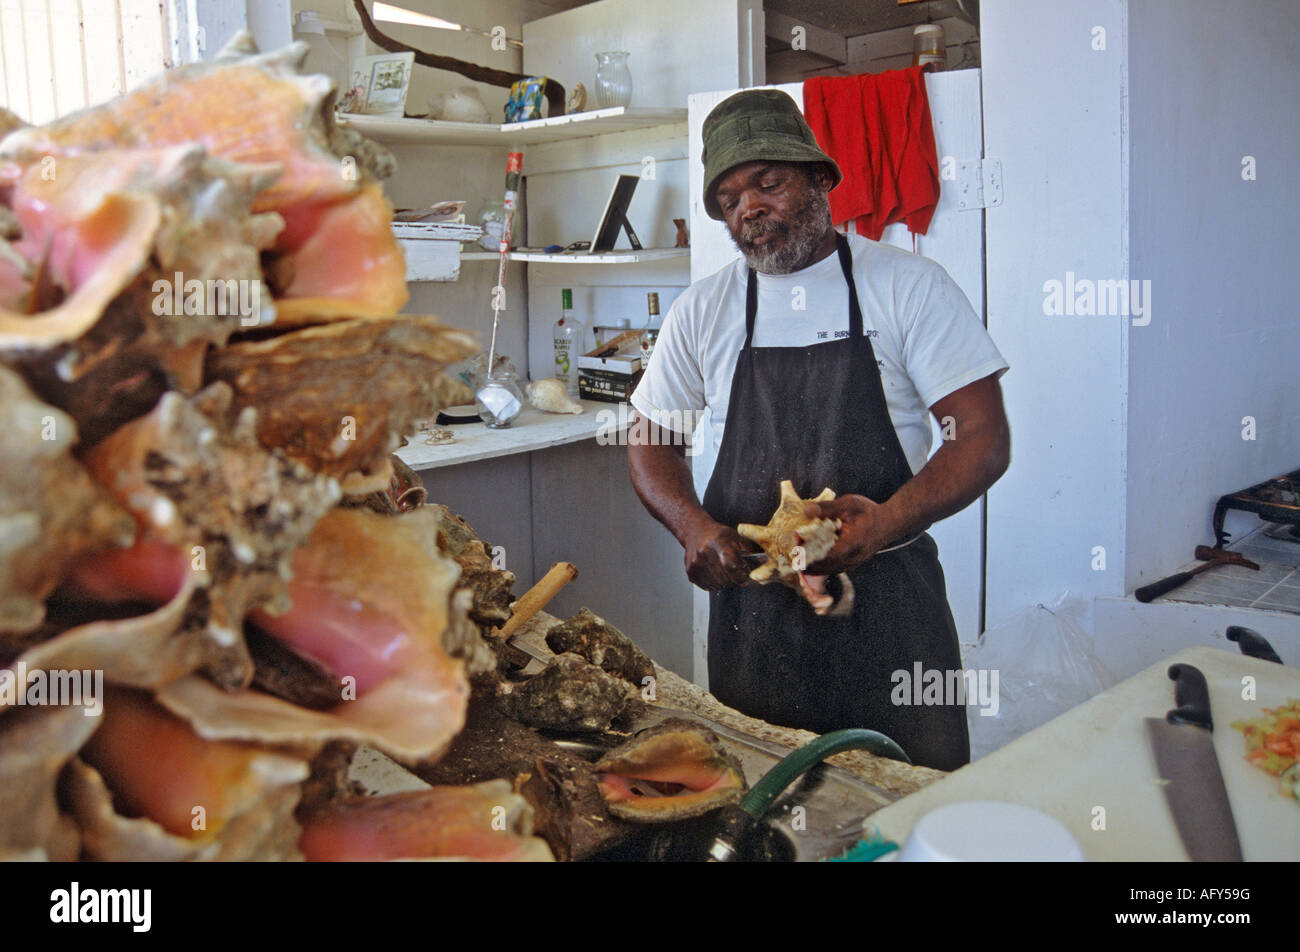 Preparing conch salad at a stand in Potters Cay Nassau Bahamas Stock Photo